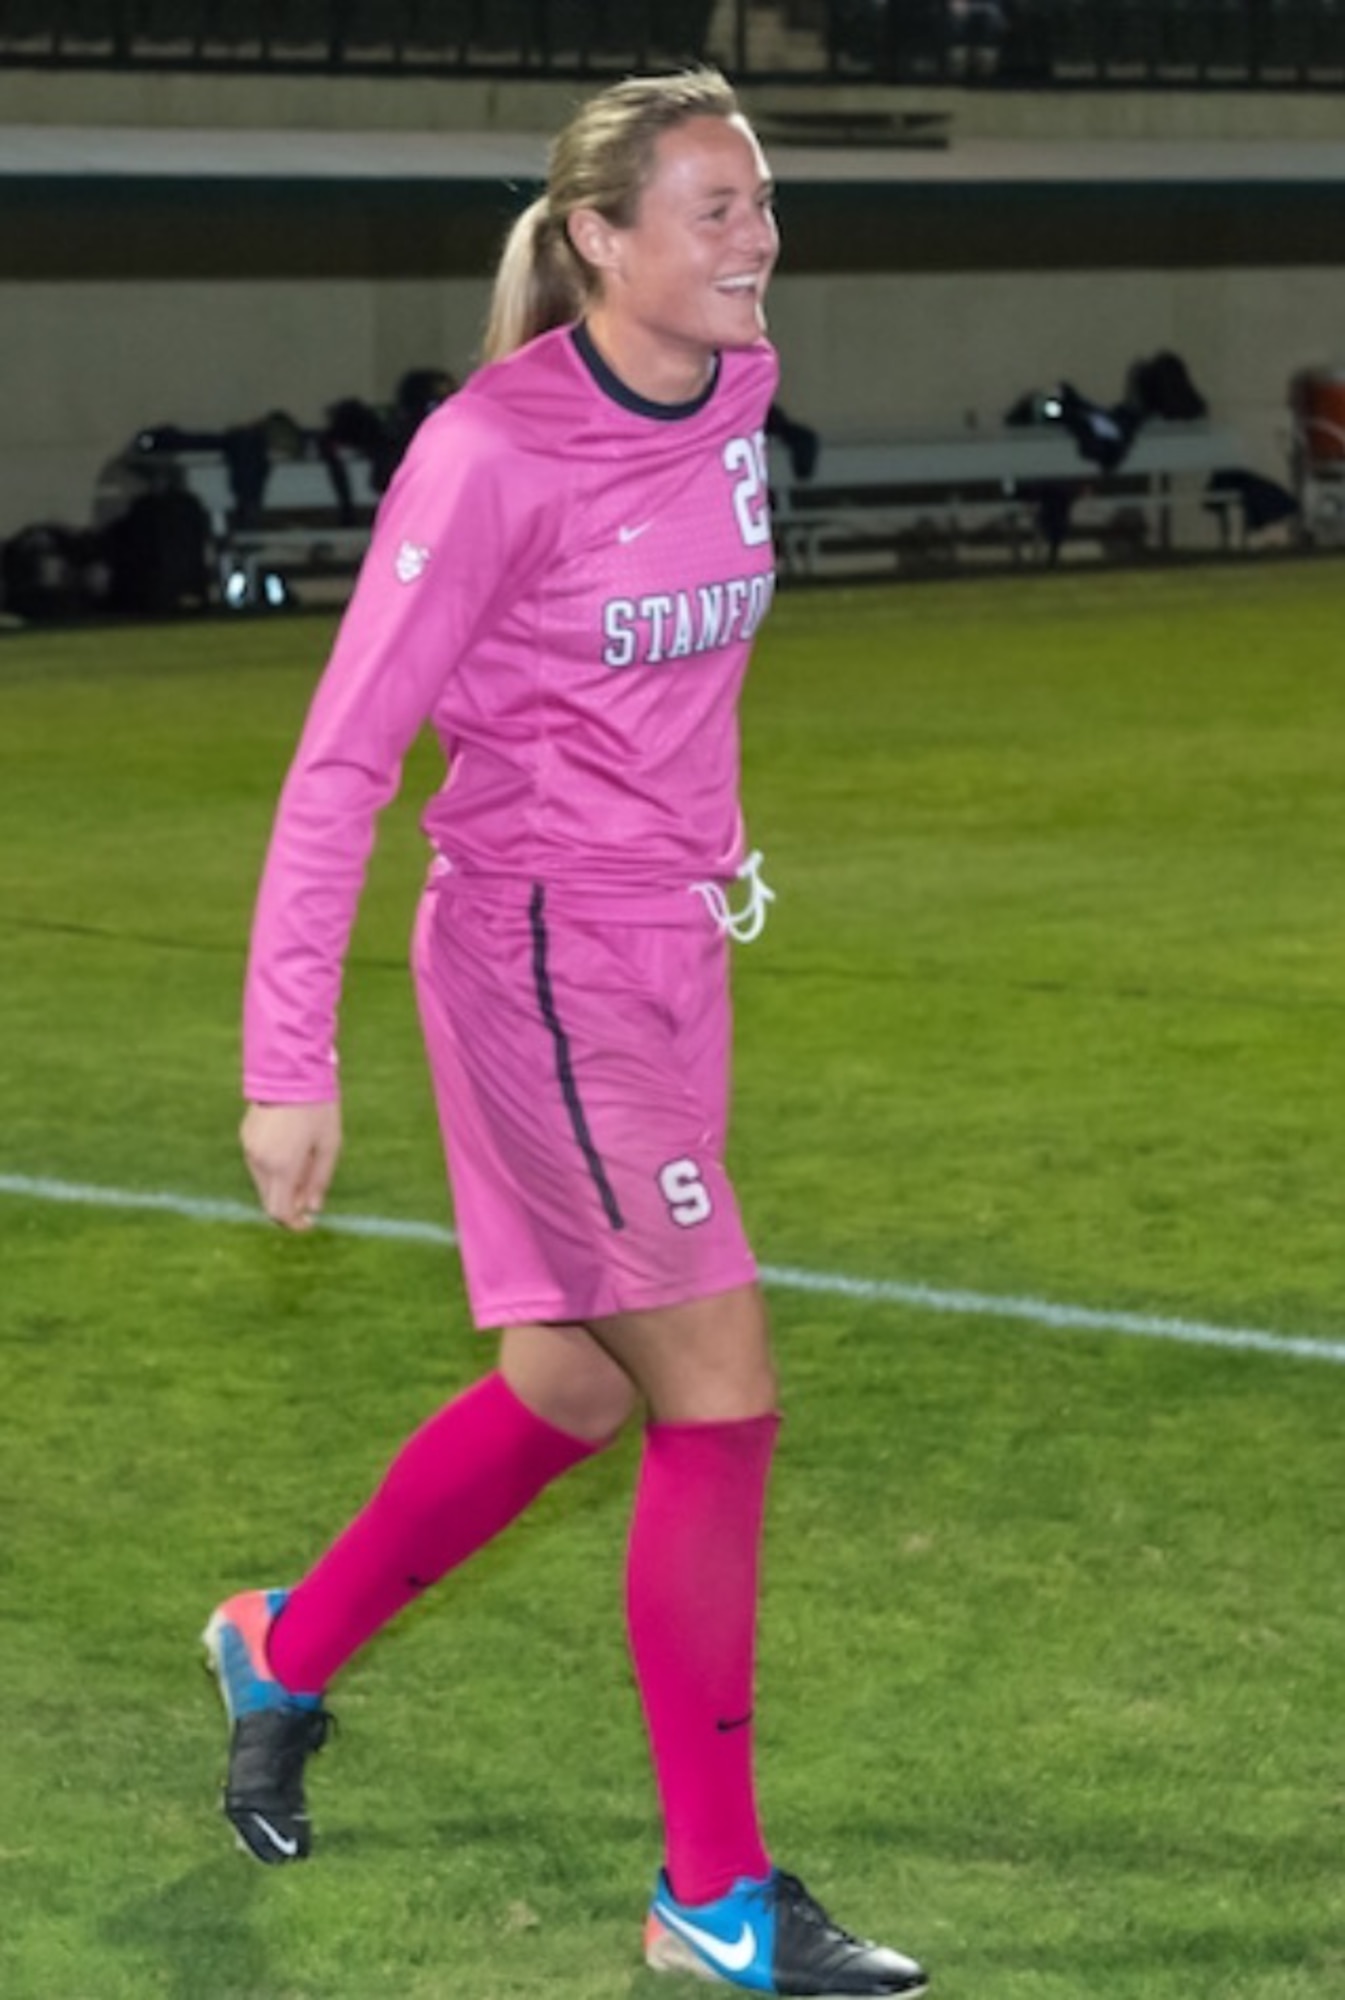 Alyson Gleason walks across a soccer field at Stanford University, California in 2013. Gleason, now a U.S. Air Force captain and Space Enhancement Officer, Director of Space Forces Staff, U.S. Air Forces Central Command, attended Stanford on a soccer scholarship. (Courtesy Photo)